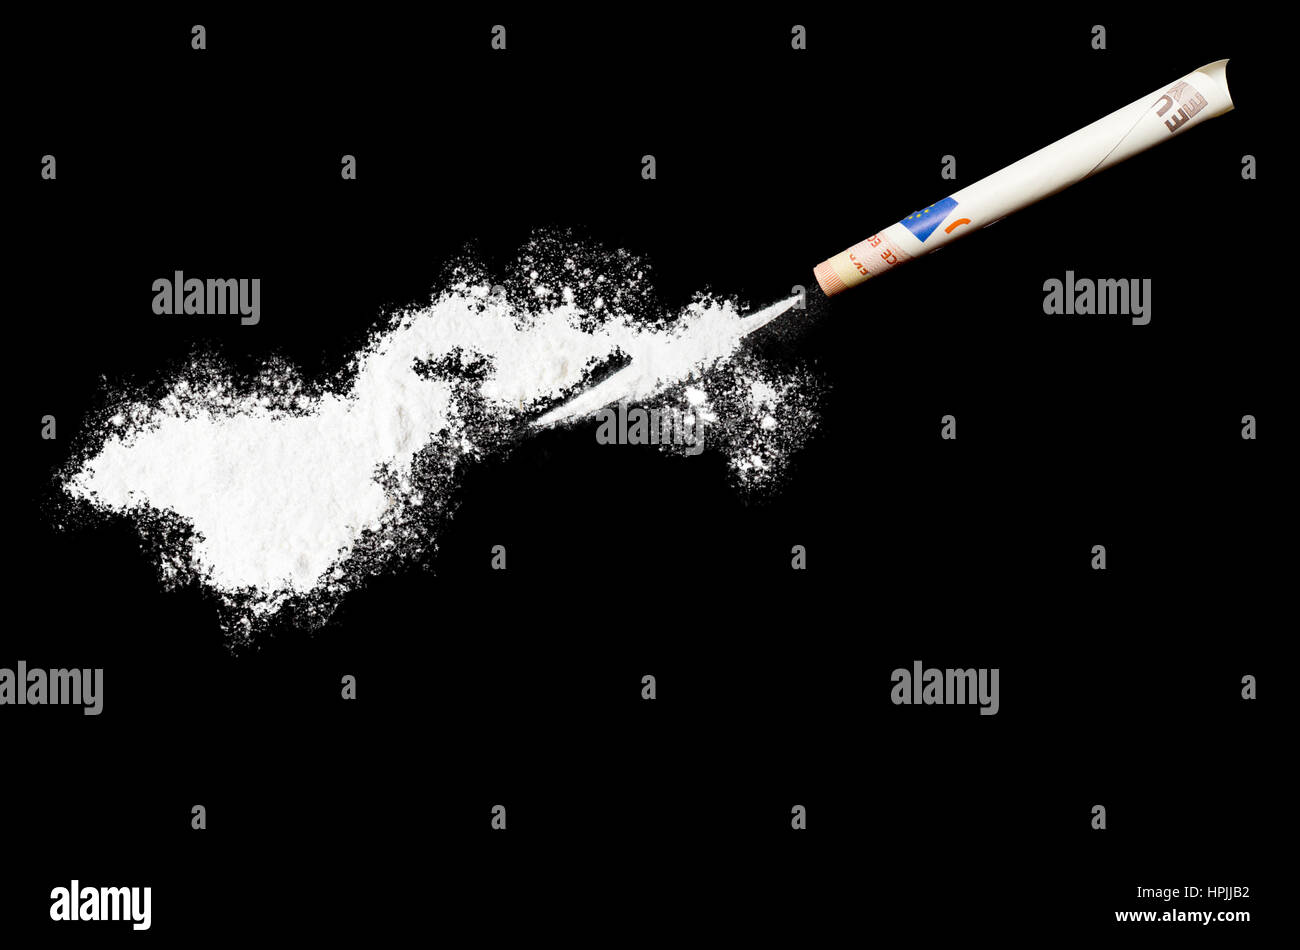 A powder drug like cocaine in the shape of American Samoa with a rolled money bill.(series) Stock Photo